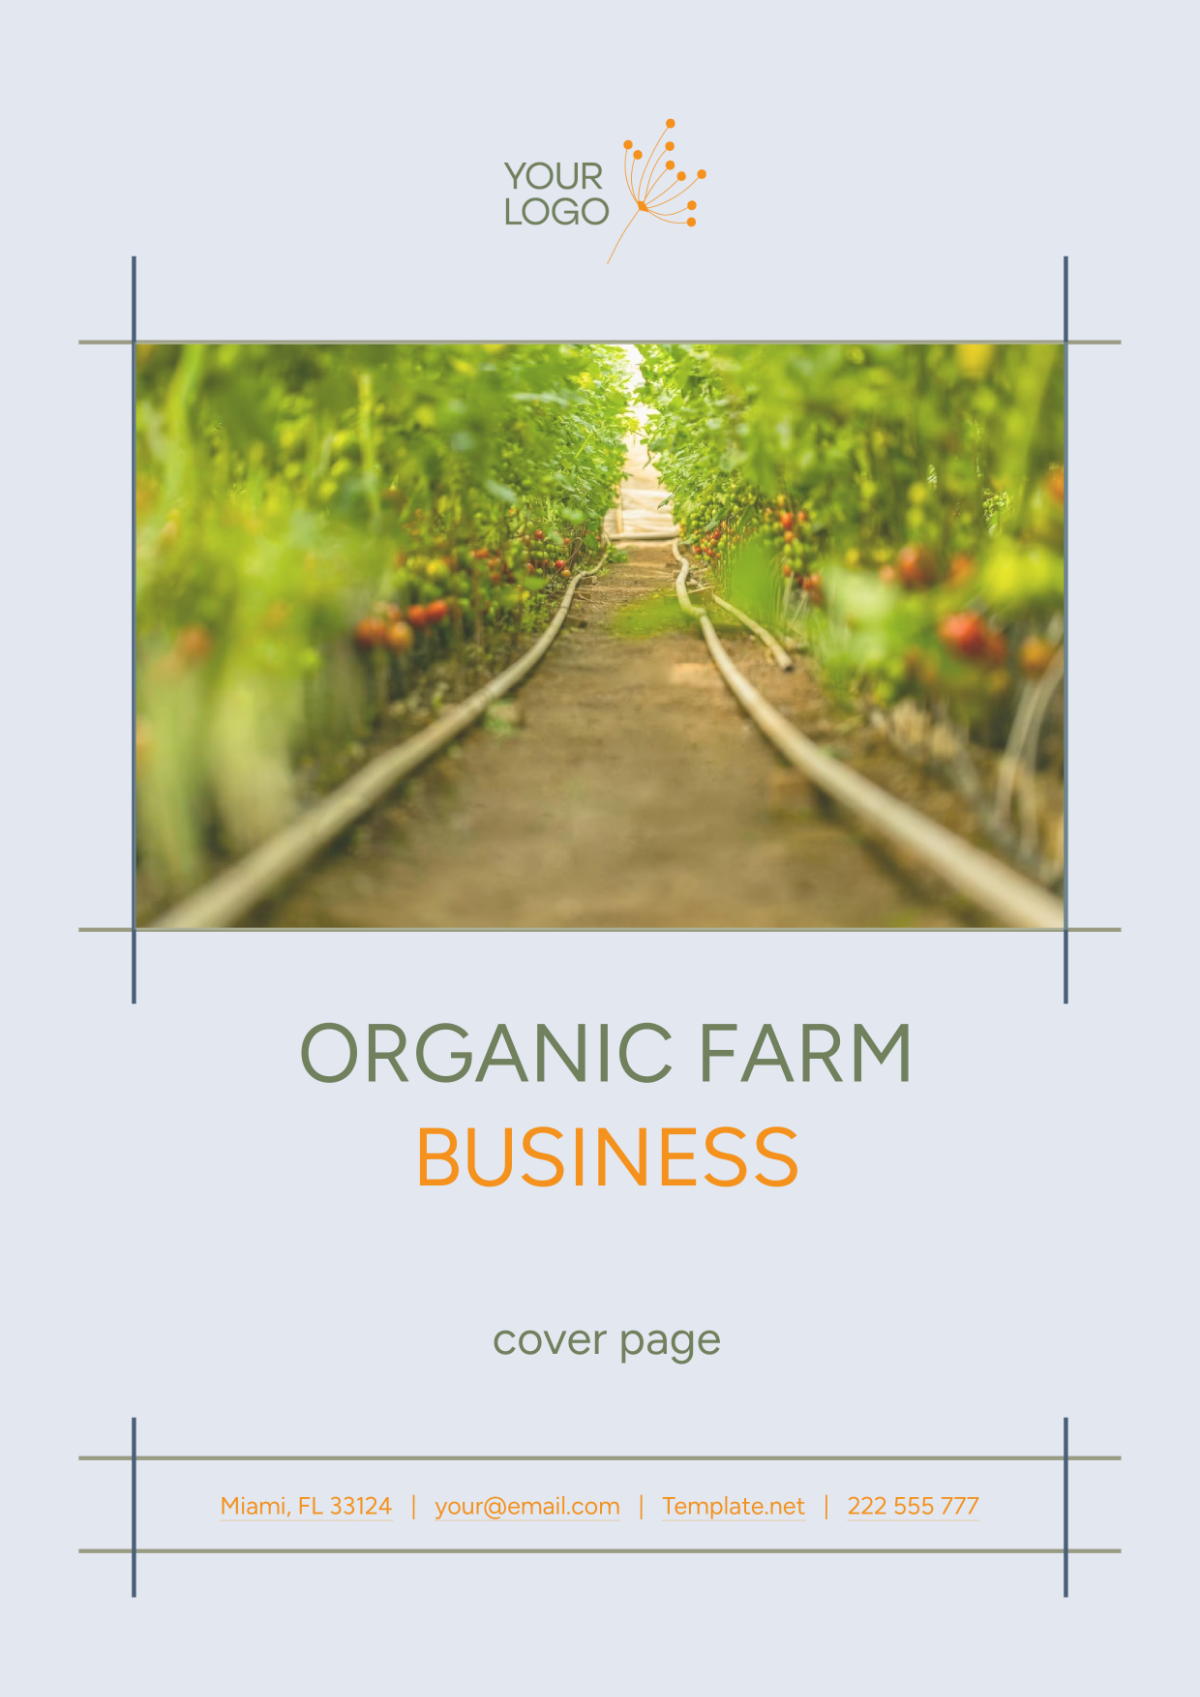 Organic Farm Business Cover Page Template